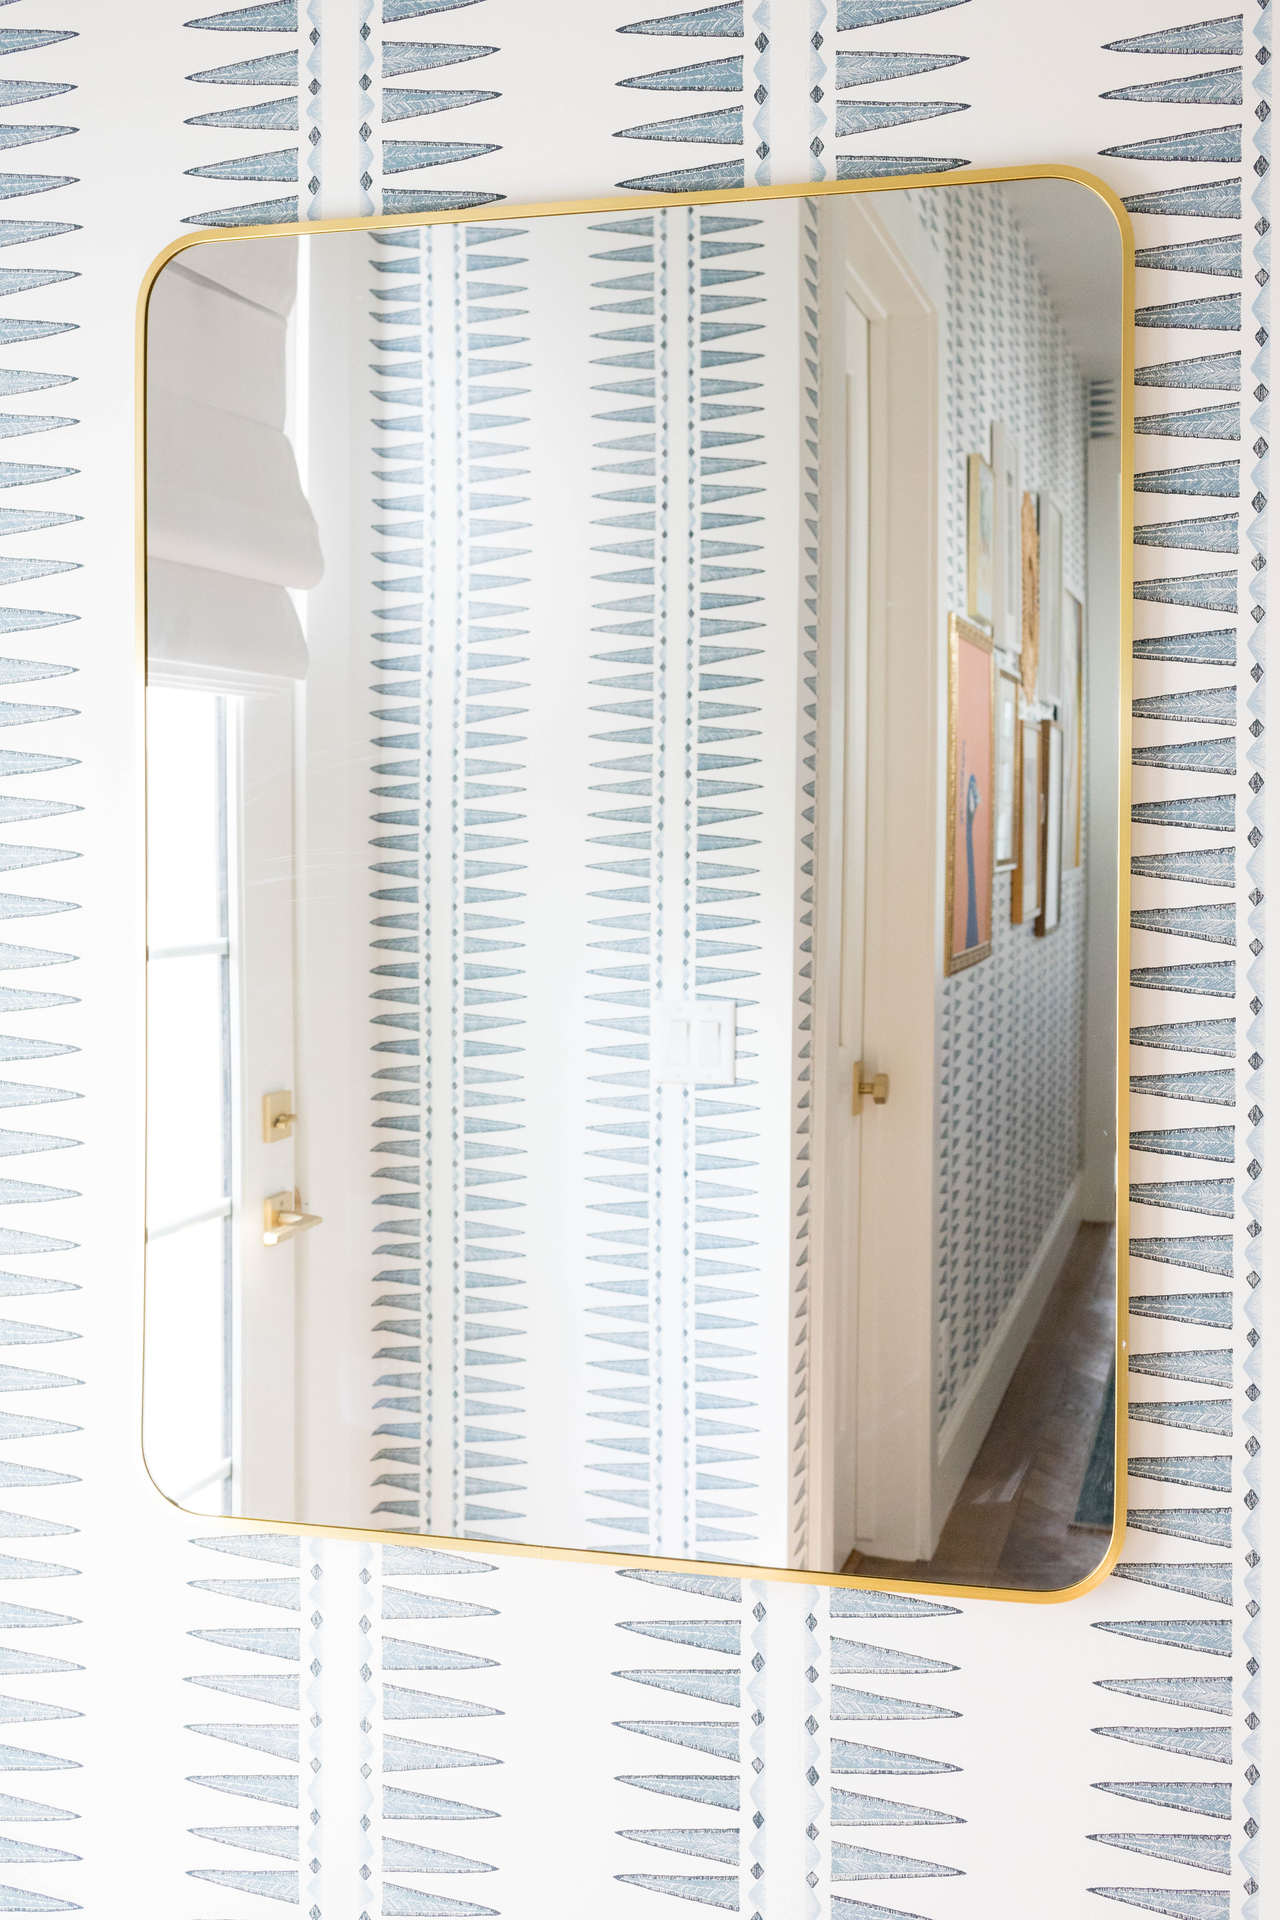 Jo Gick's hallway in Quill (Cadet) wallpaper | Coral & Tusk for Hygge & West